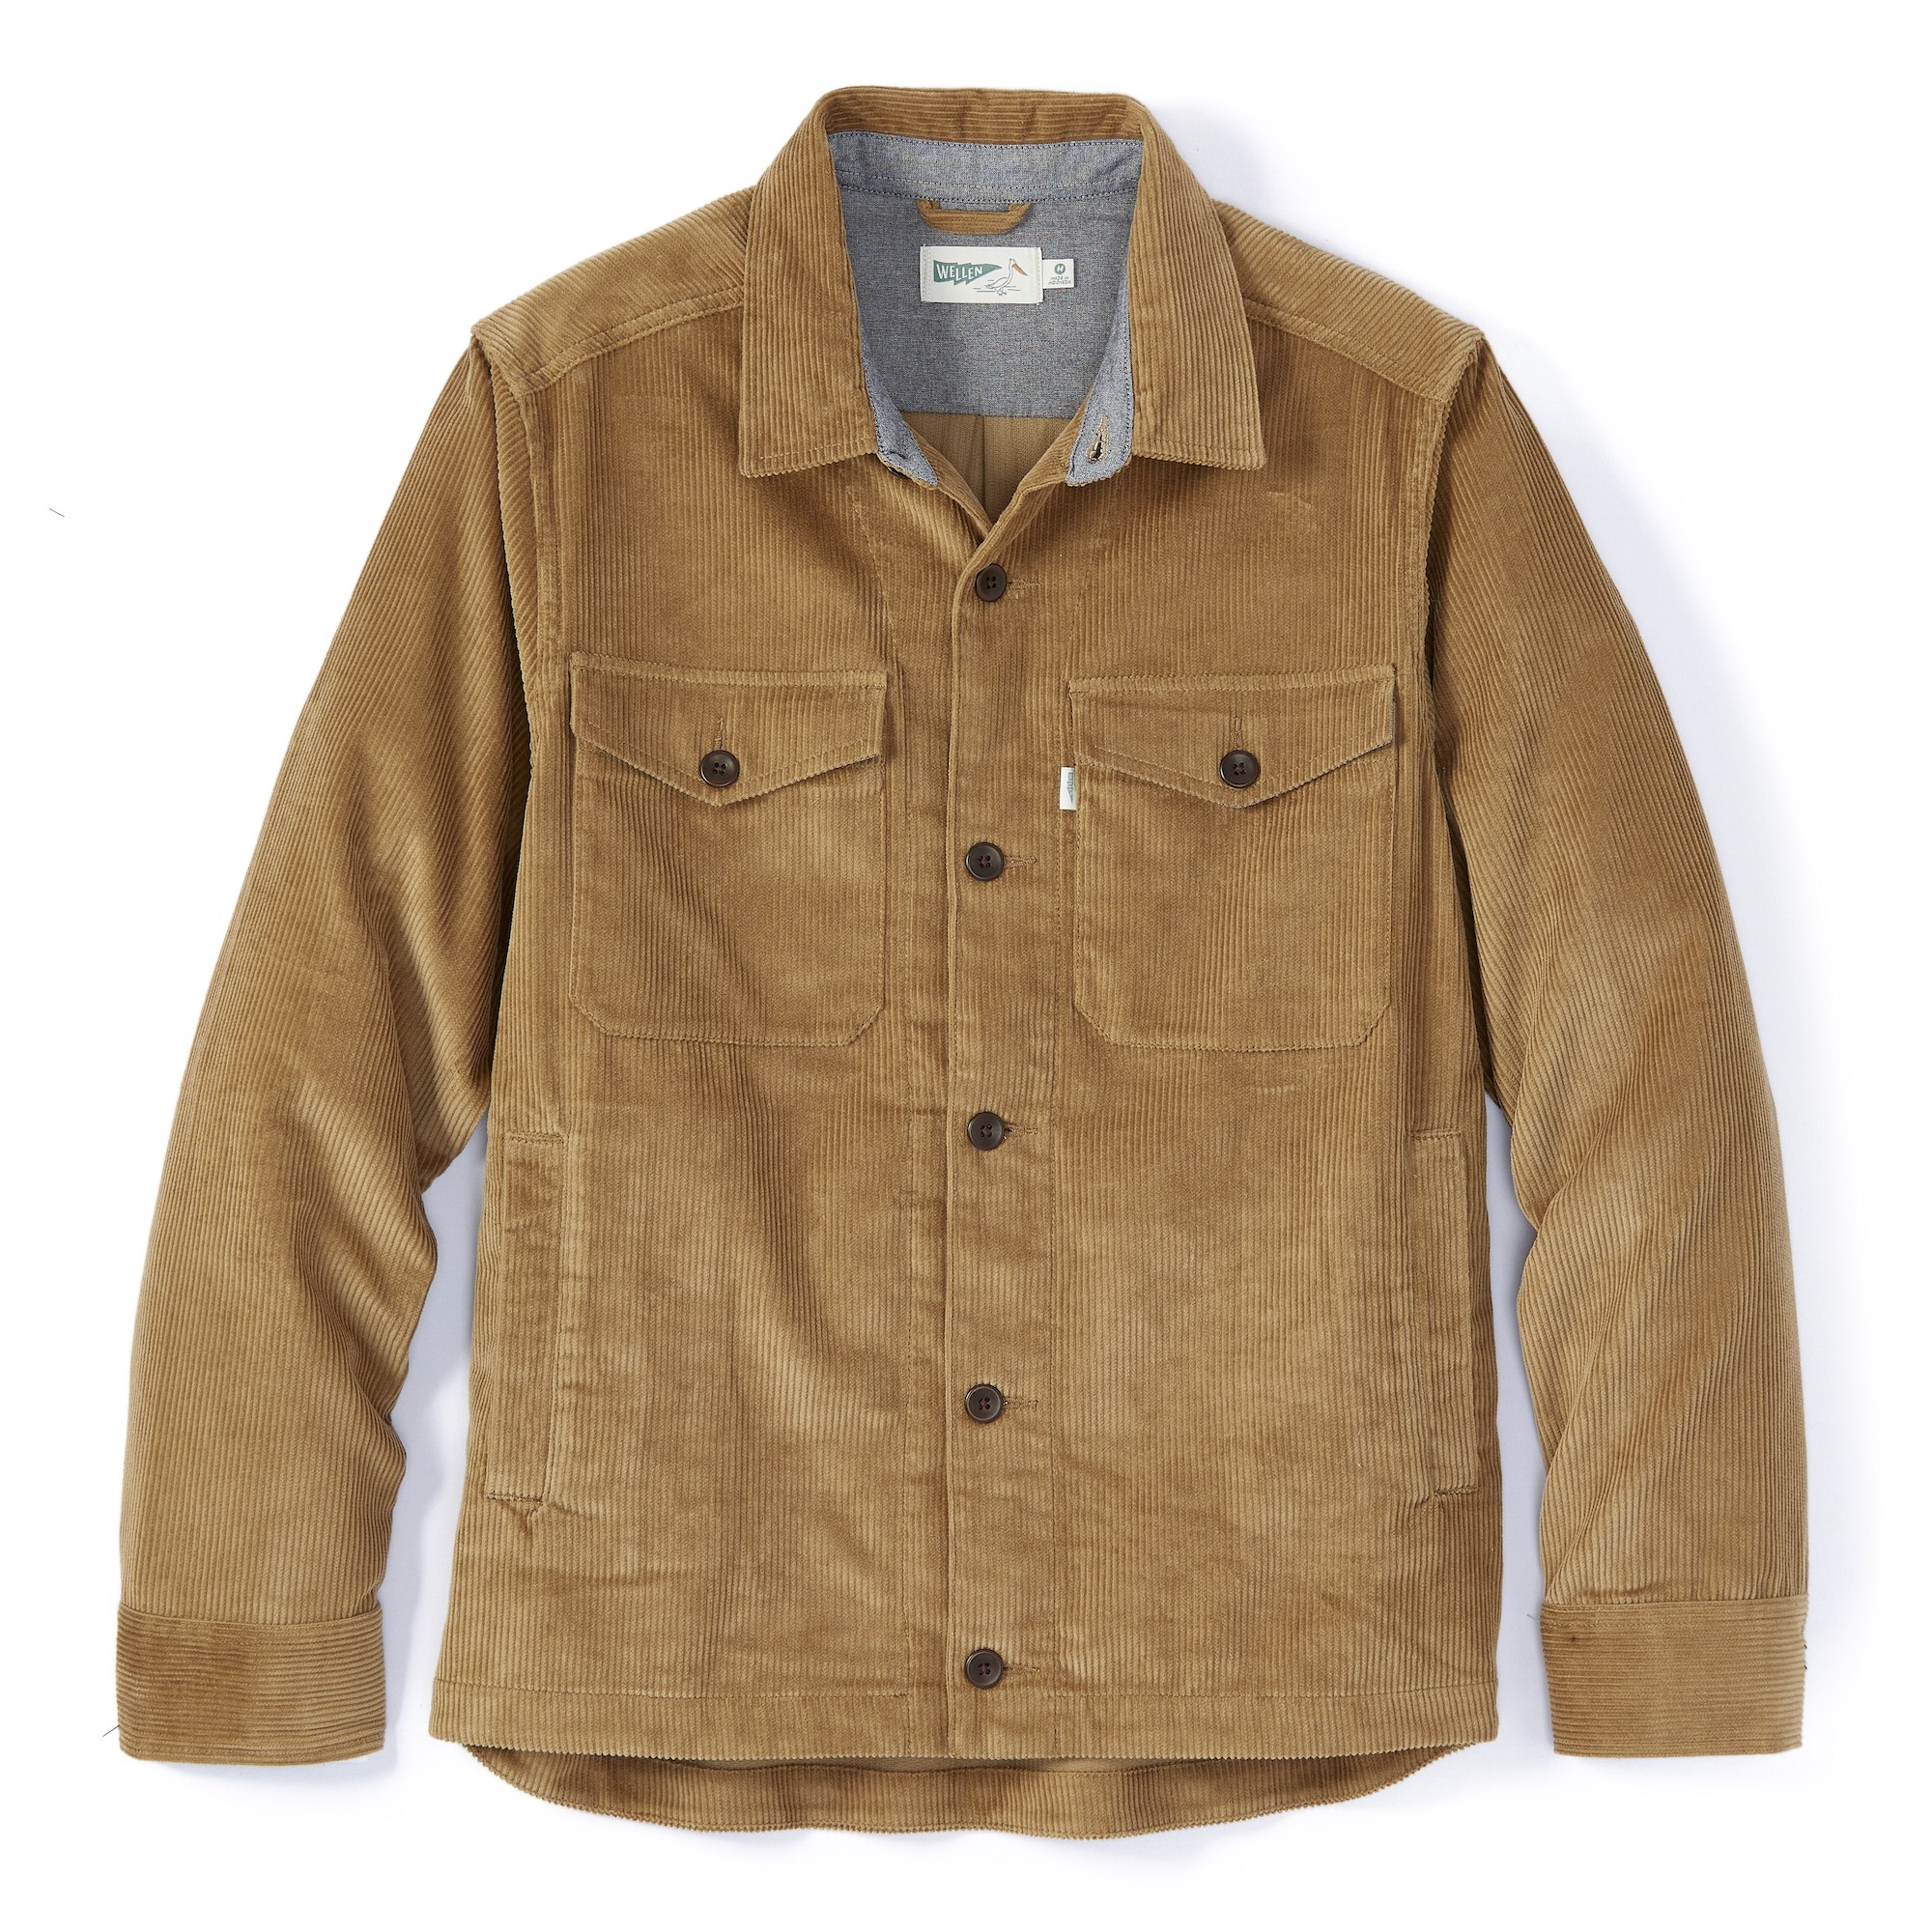 Wellen Corduroy Jackets And Chinos Are 40% Off Today At Huckberry ...